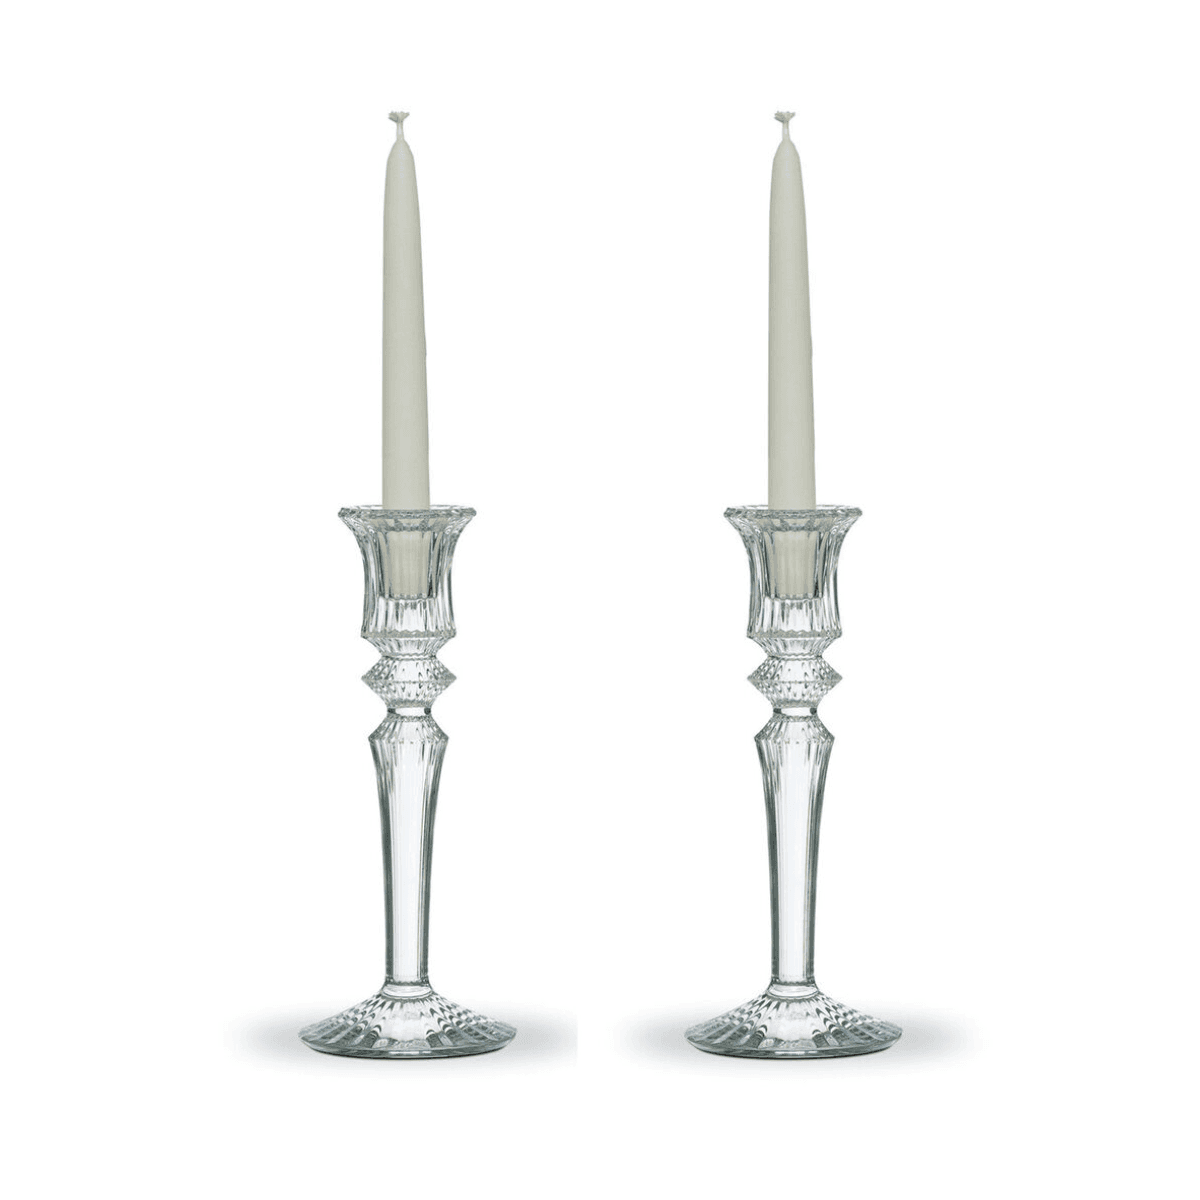 Baccarat Mille Nuits Candlesticks, pair